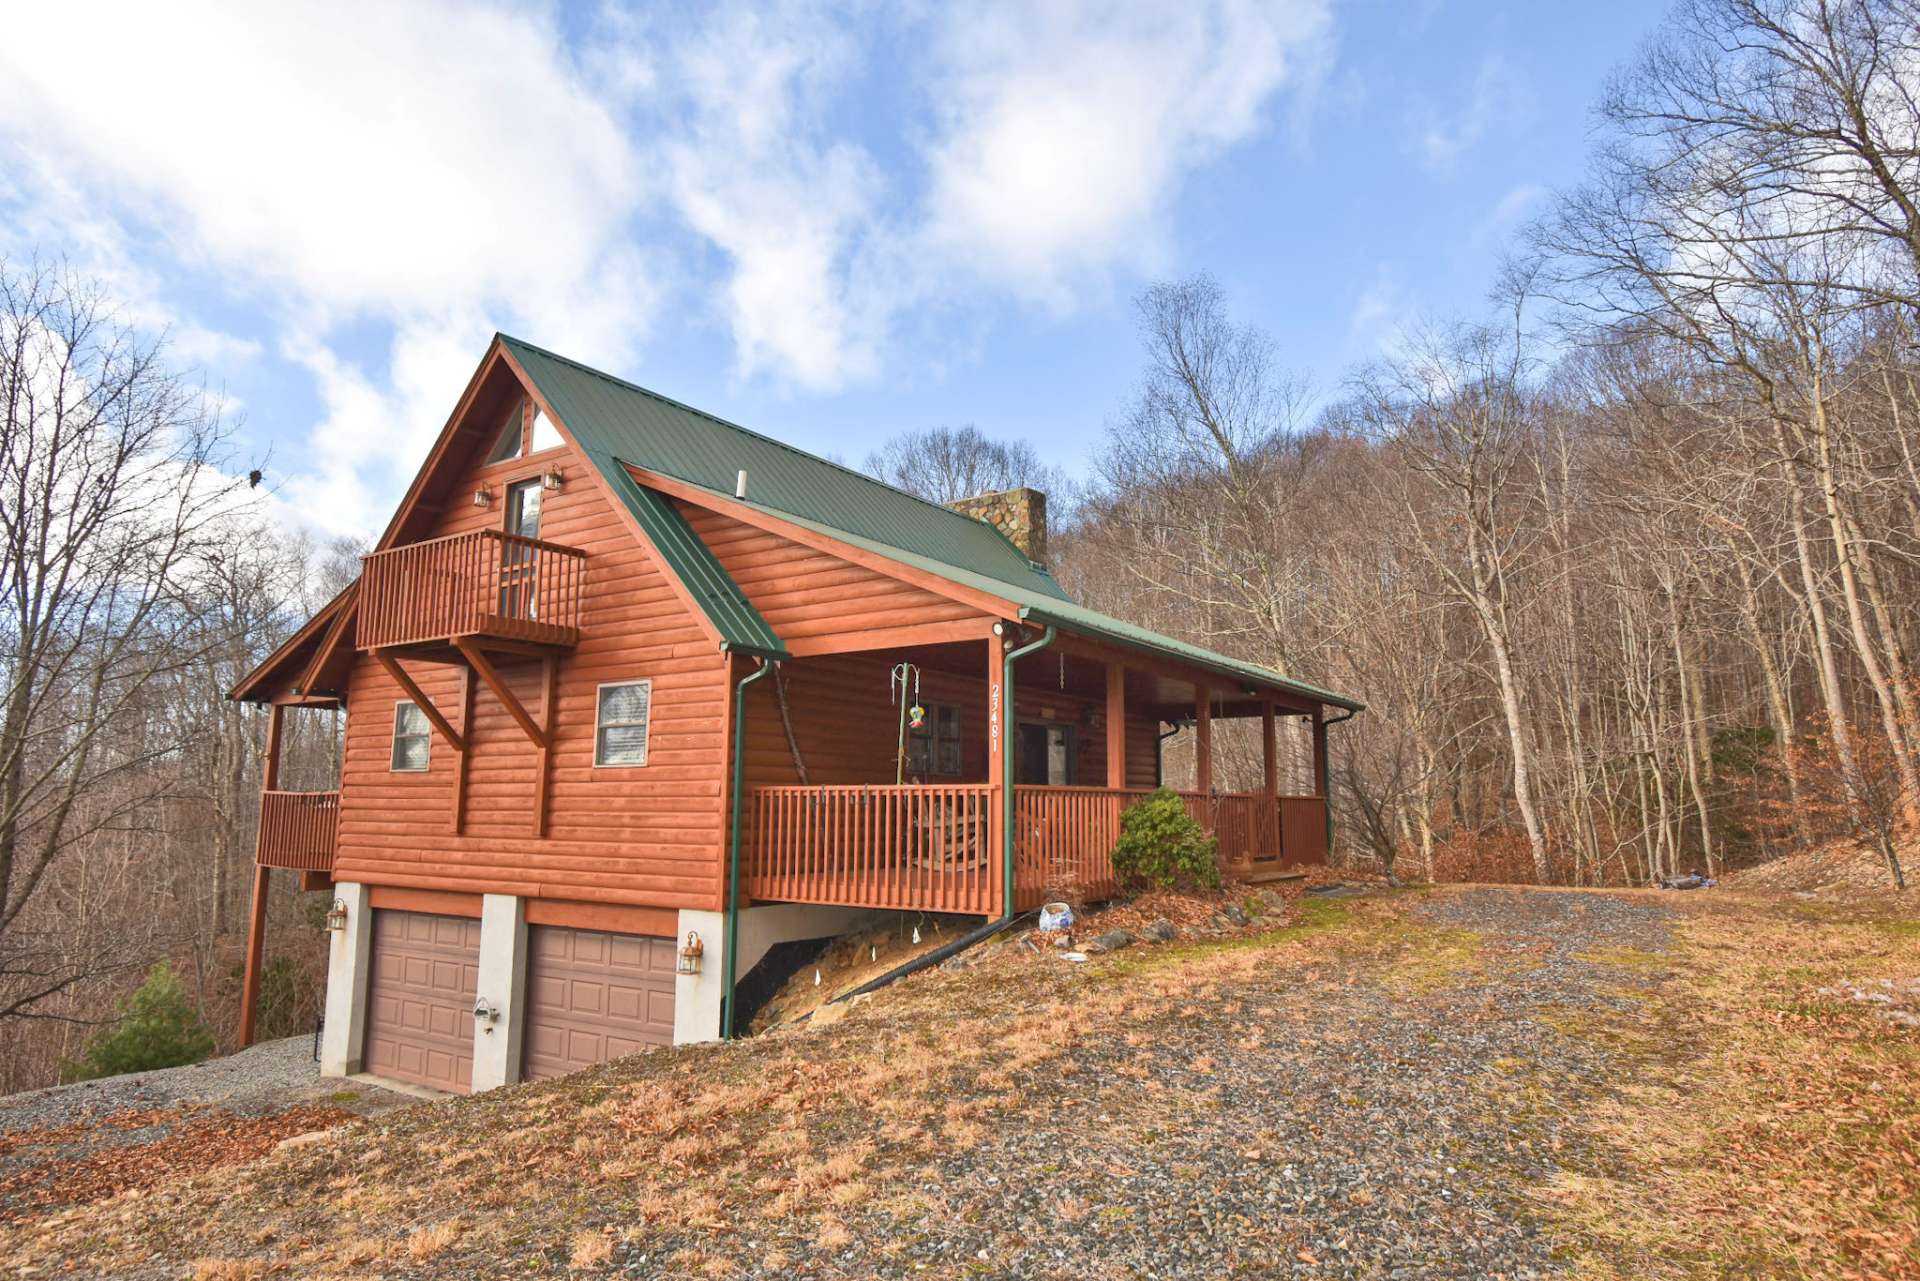 Nestled in the middle of this wonderland is a charming cabin with 2 bedrooms, 2-baths, gorgeous oak flooring, stone fireplace, basement with 2-car garage and expansion possibilities and large covered front and back porches to relax and enjoy layered long-range views.